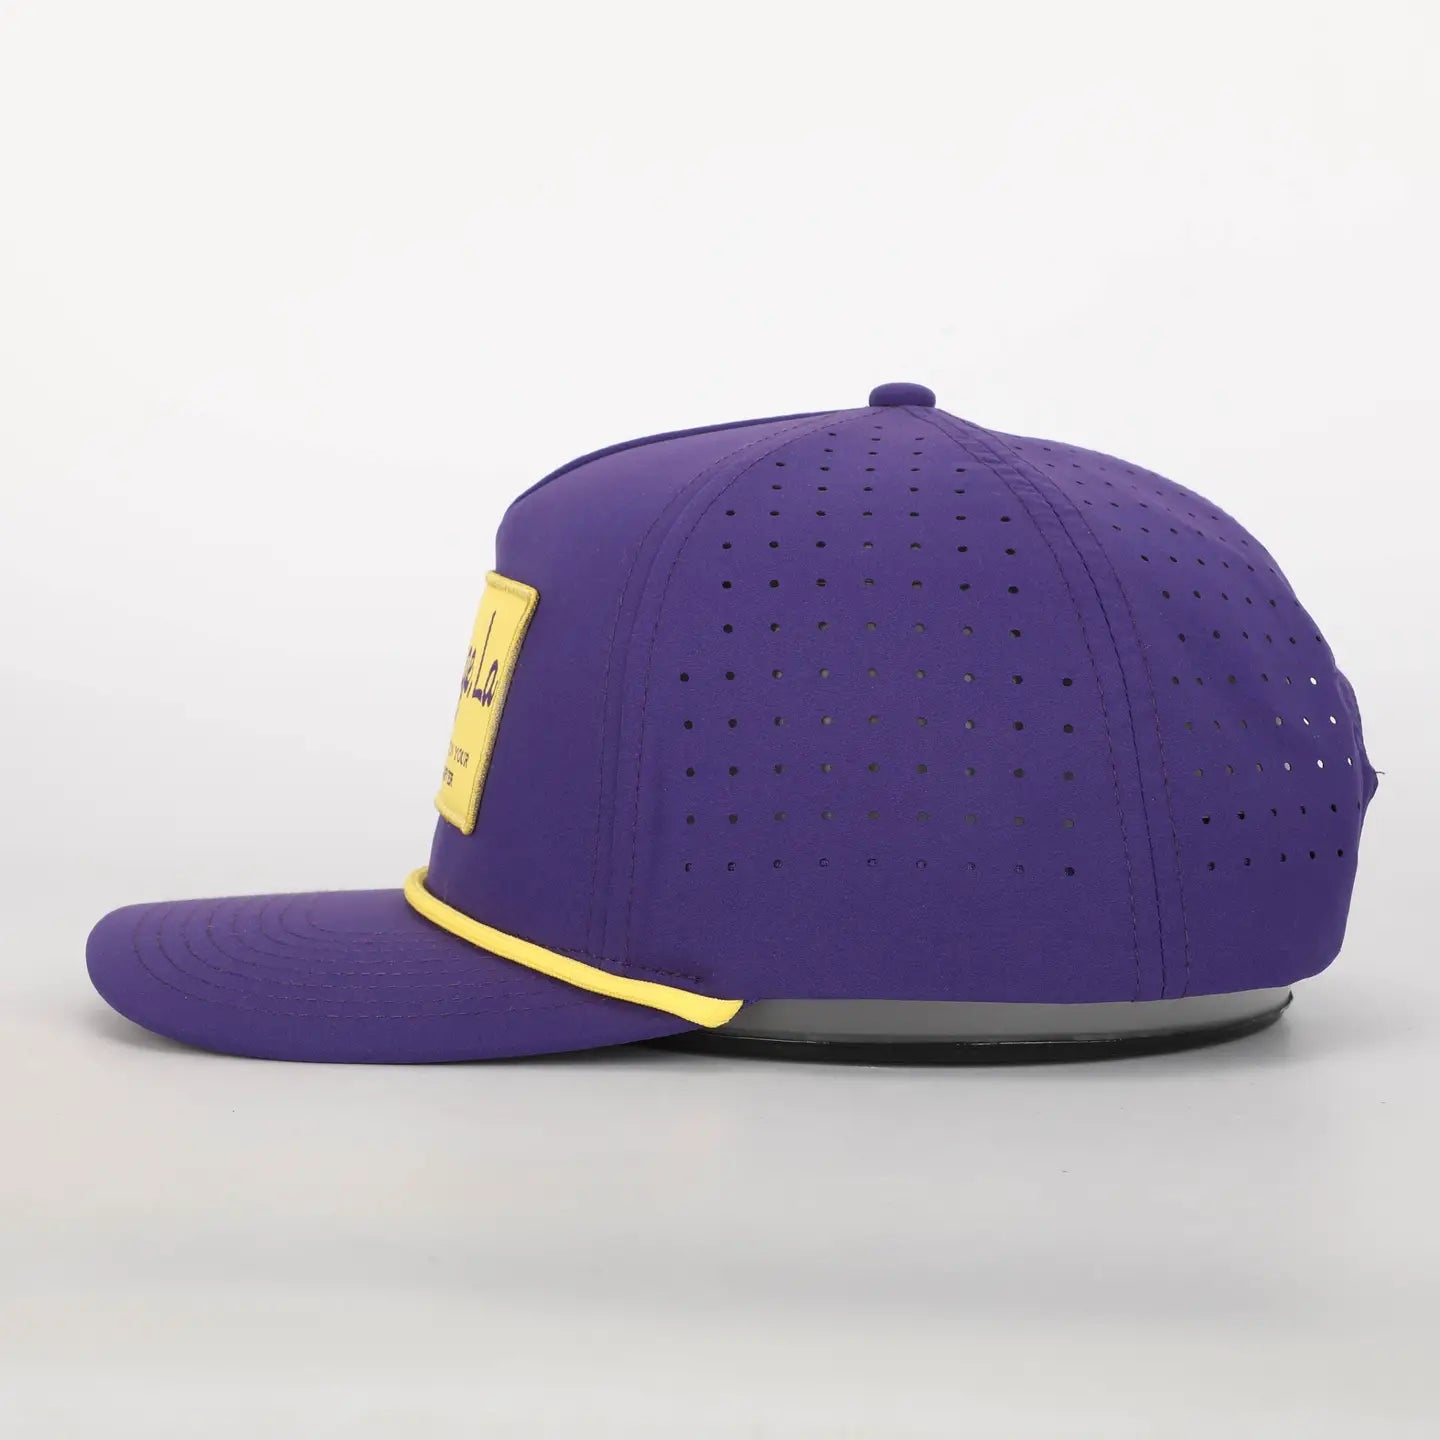 Baton Rouge, La Rope Hat with Patch